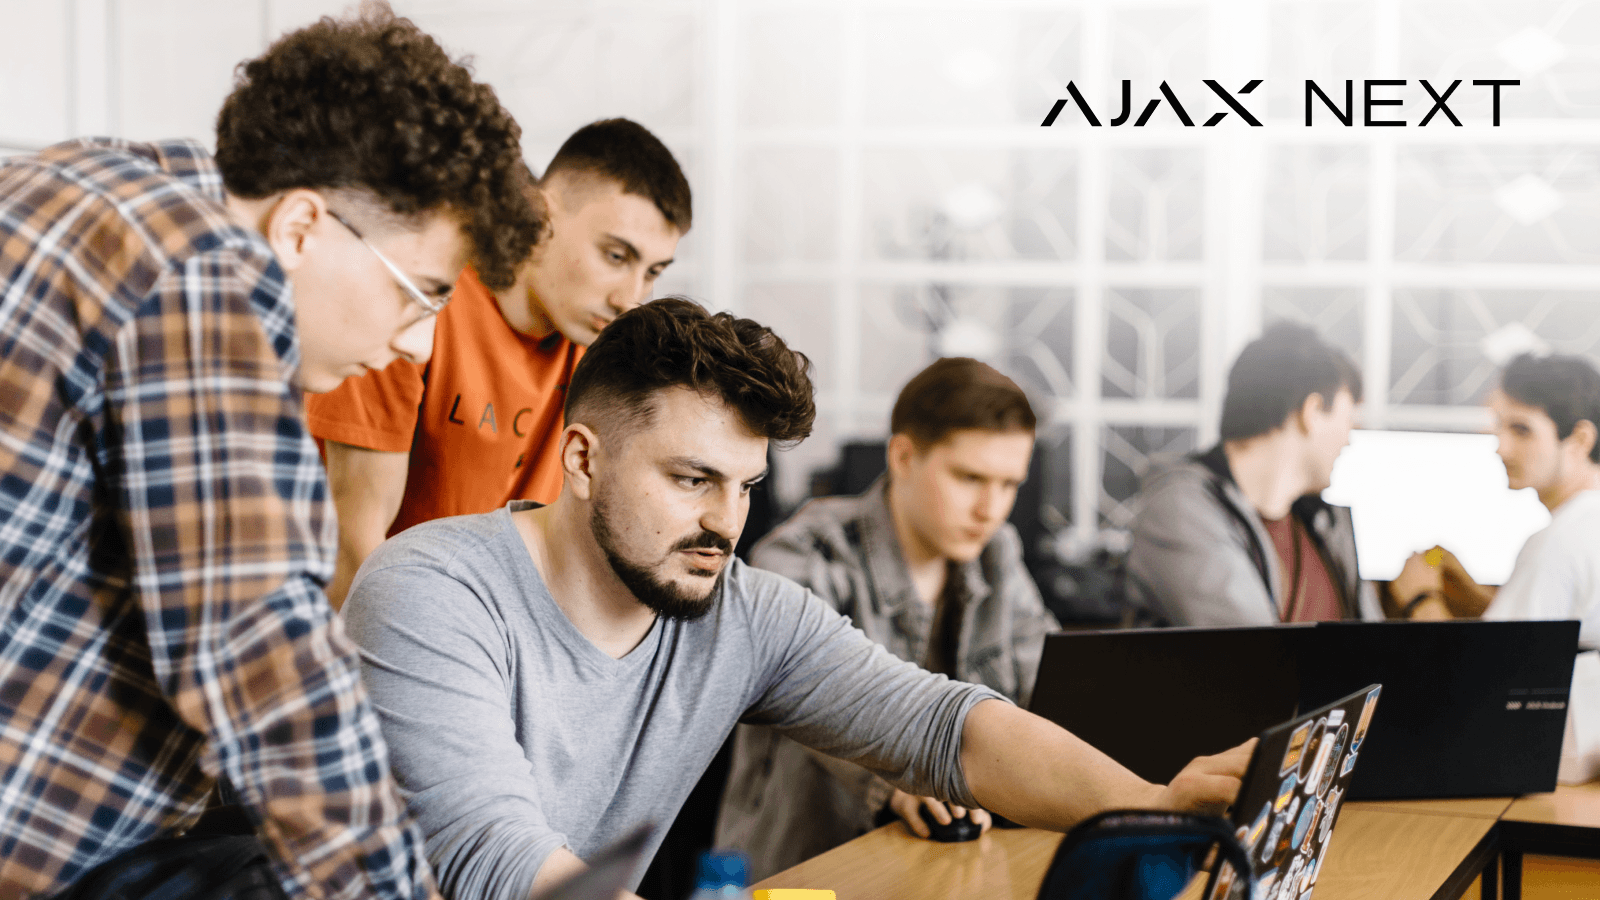 Ajax Systems launches a valuable educational initiative  Ajax Next